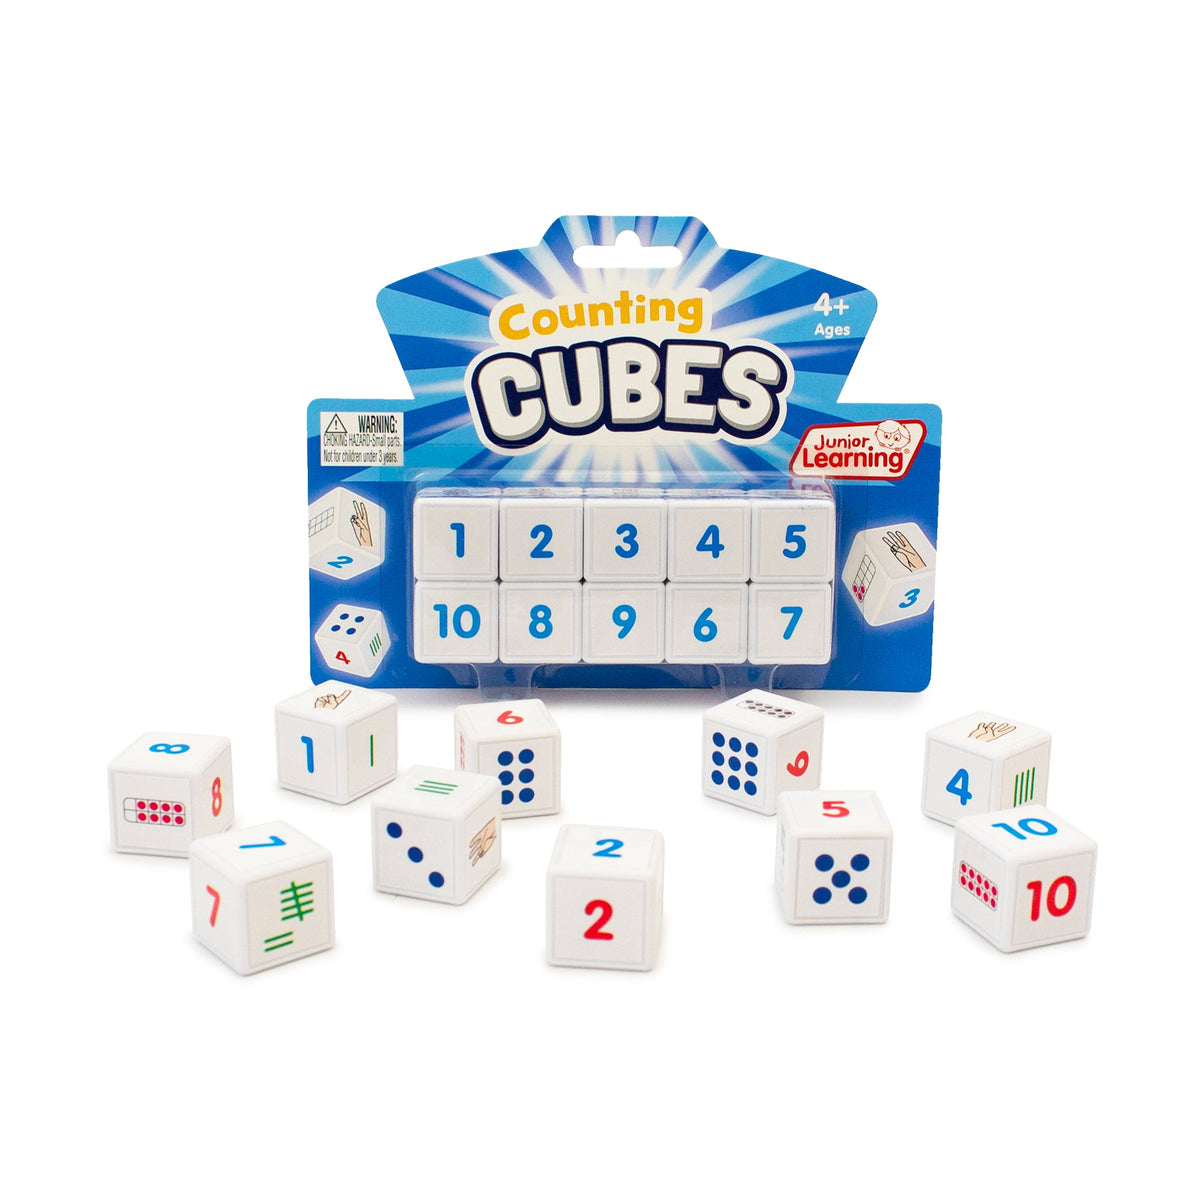 Junior Learning JL645 Counting Cubes packaging and content